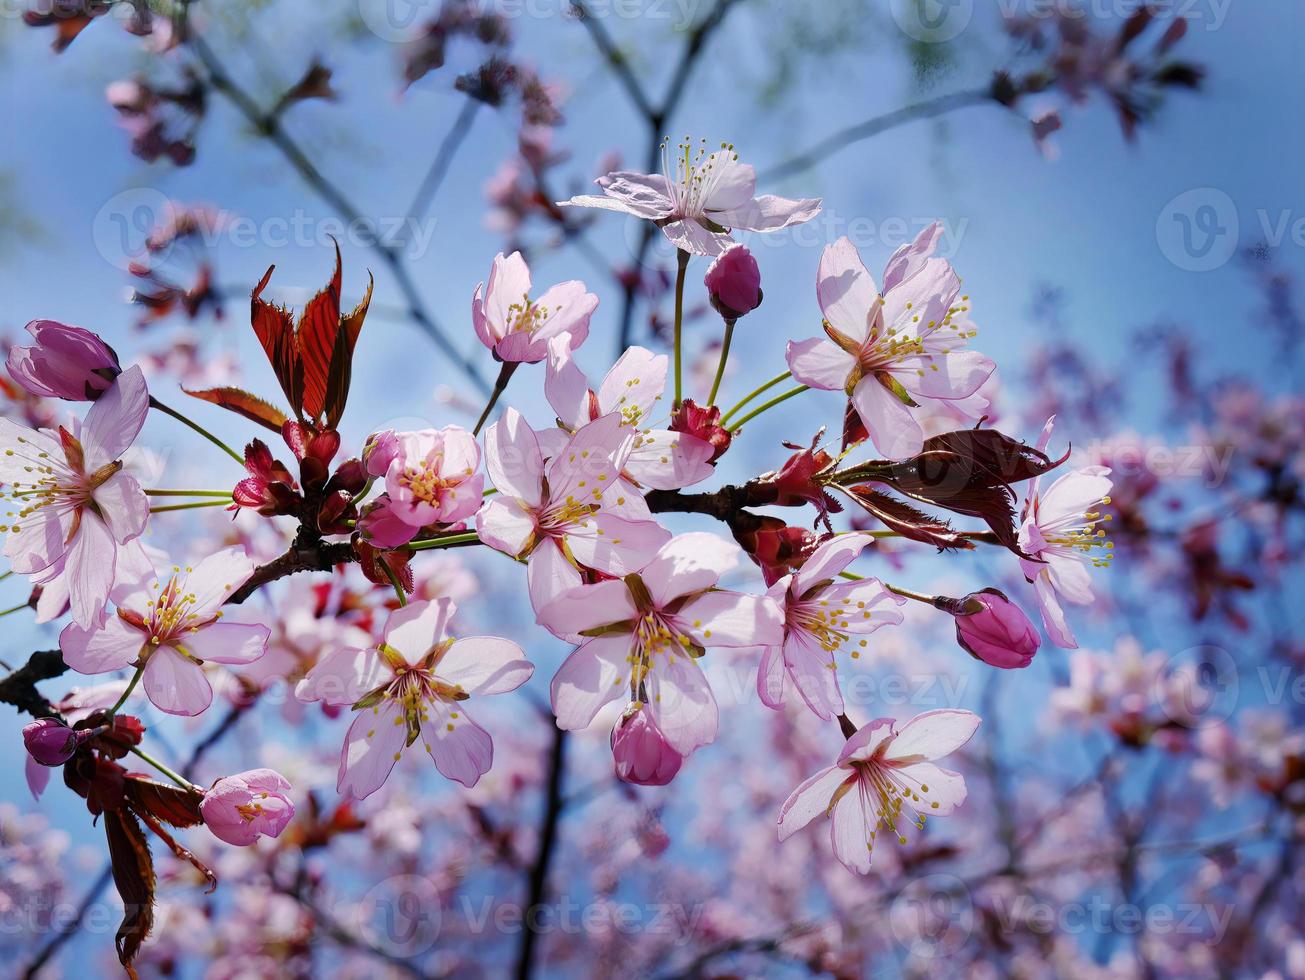 Close up bunch of Wild Himalayan cherry blossom flowers, Giant tiger flowers, Pink Sakura, Prunus cerasoides, with blue sky background, selective focus photo